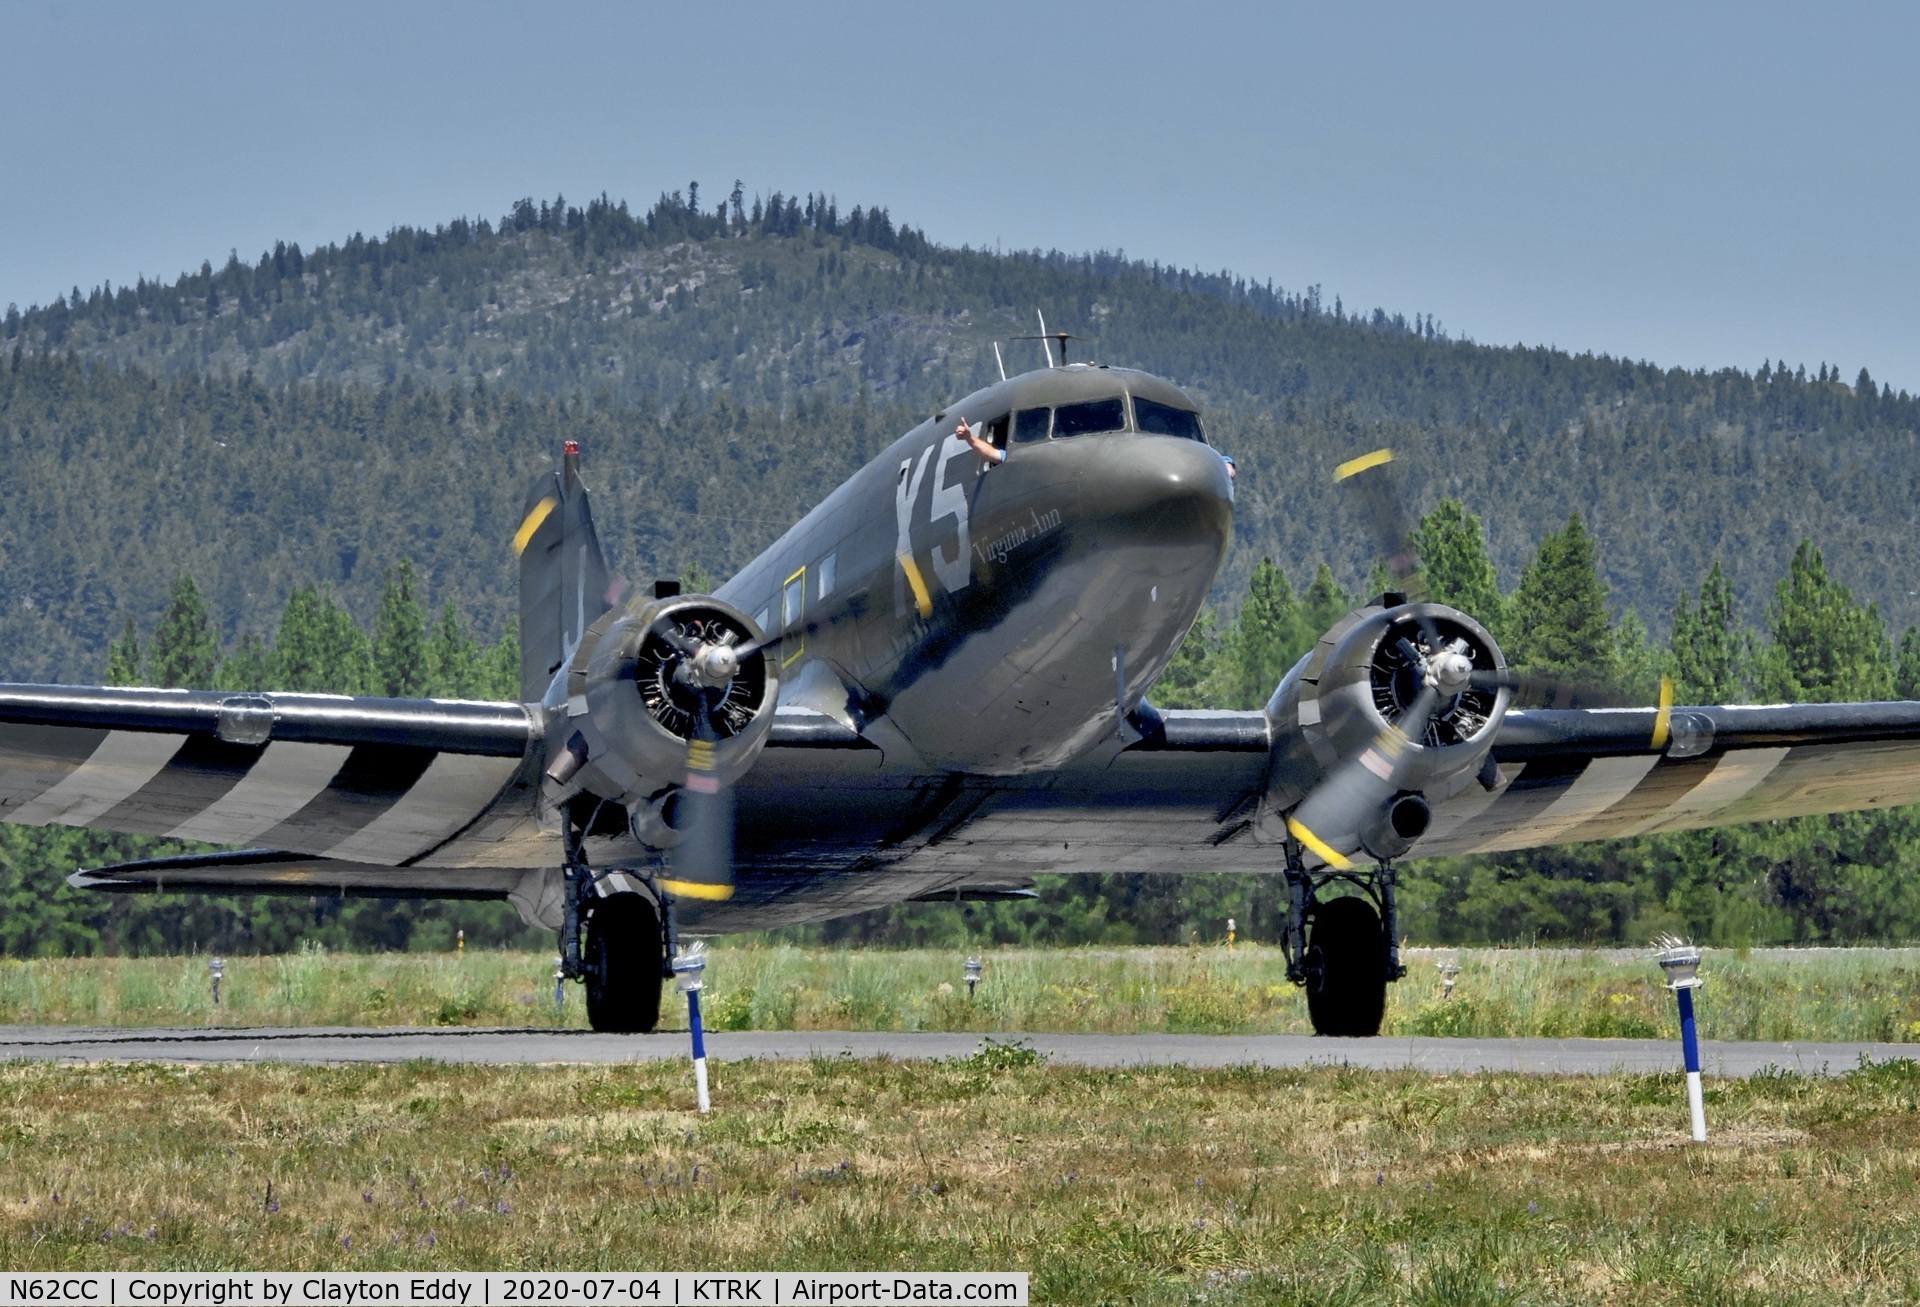 N62CC, 1943 Douglas DC-3C (C-47A-DL) C/N 13798, Part of the D-day Truckee Tahoe flyover July 4th 2020.